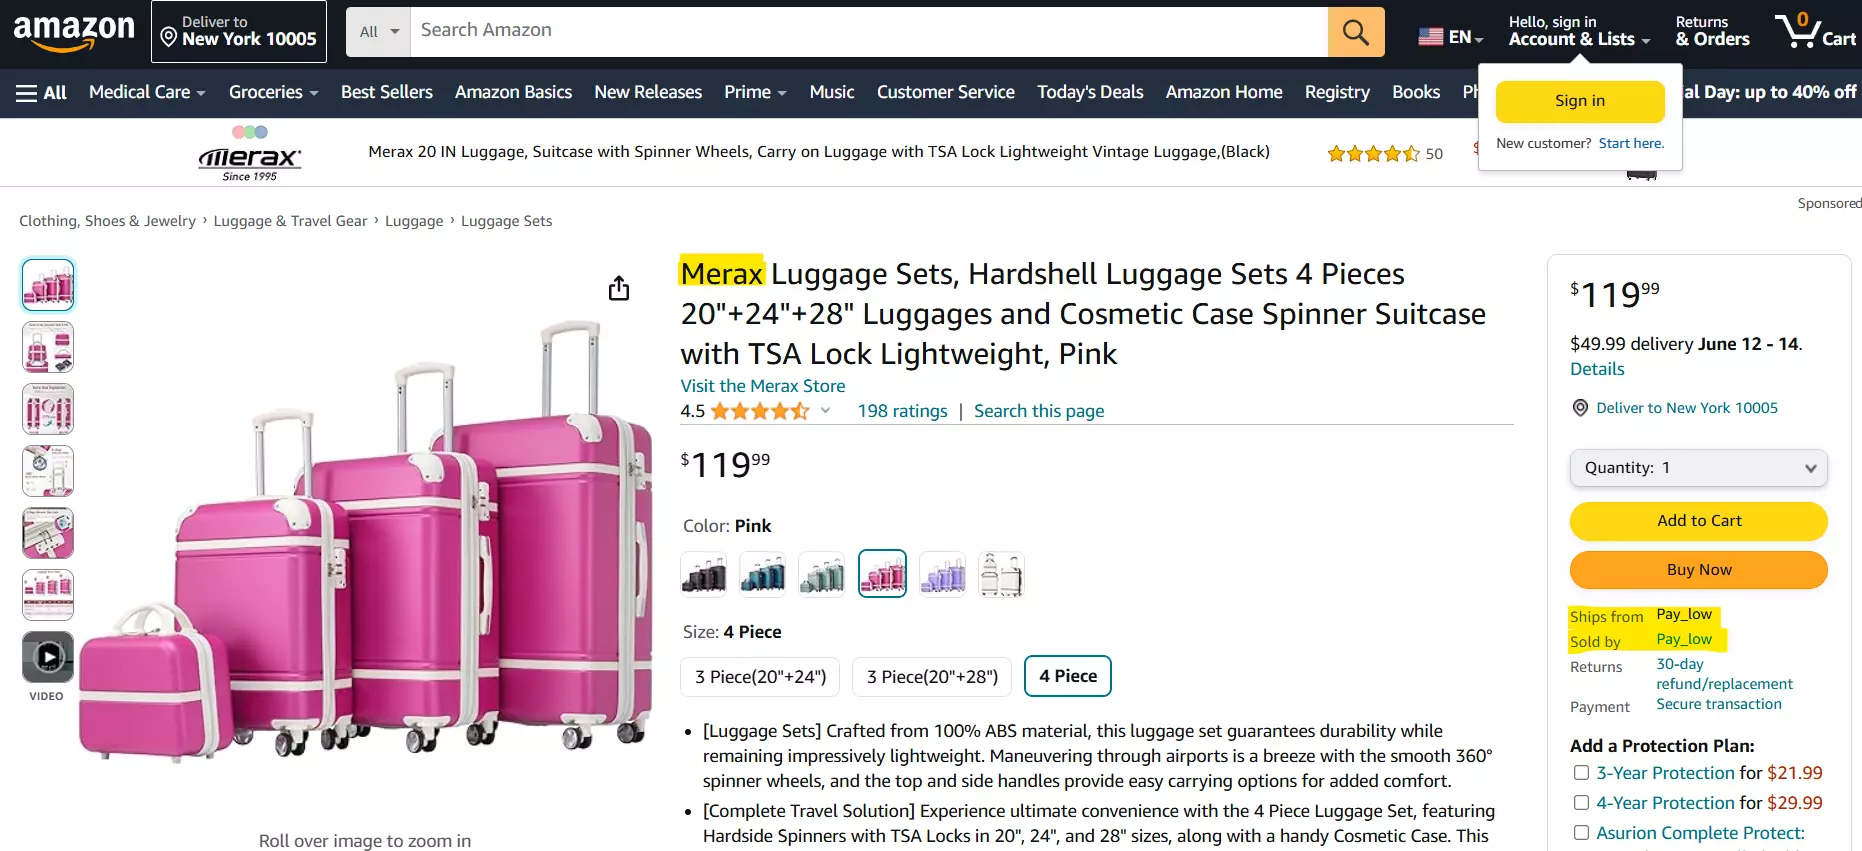 A pink luggage on a white background Description automatically generated